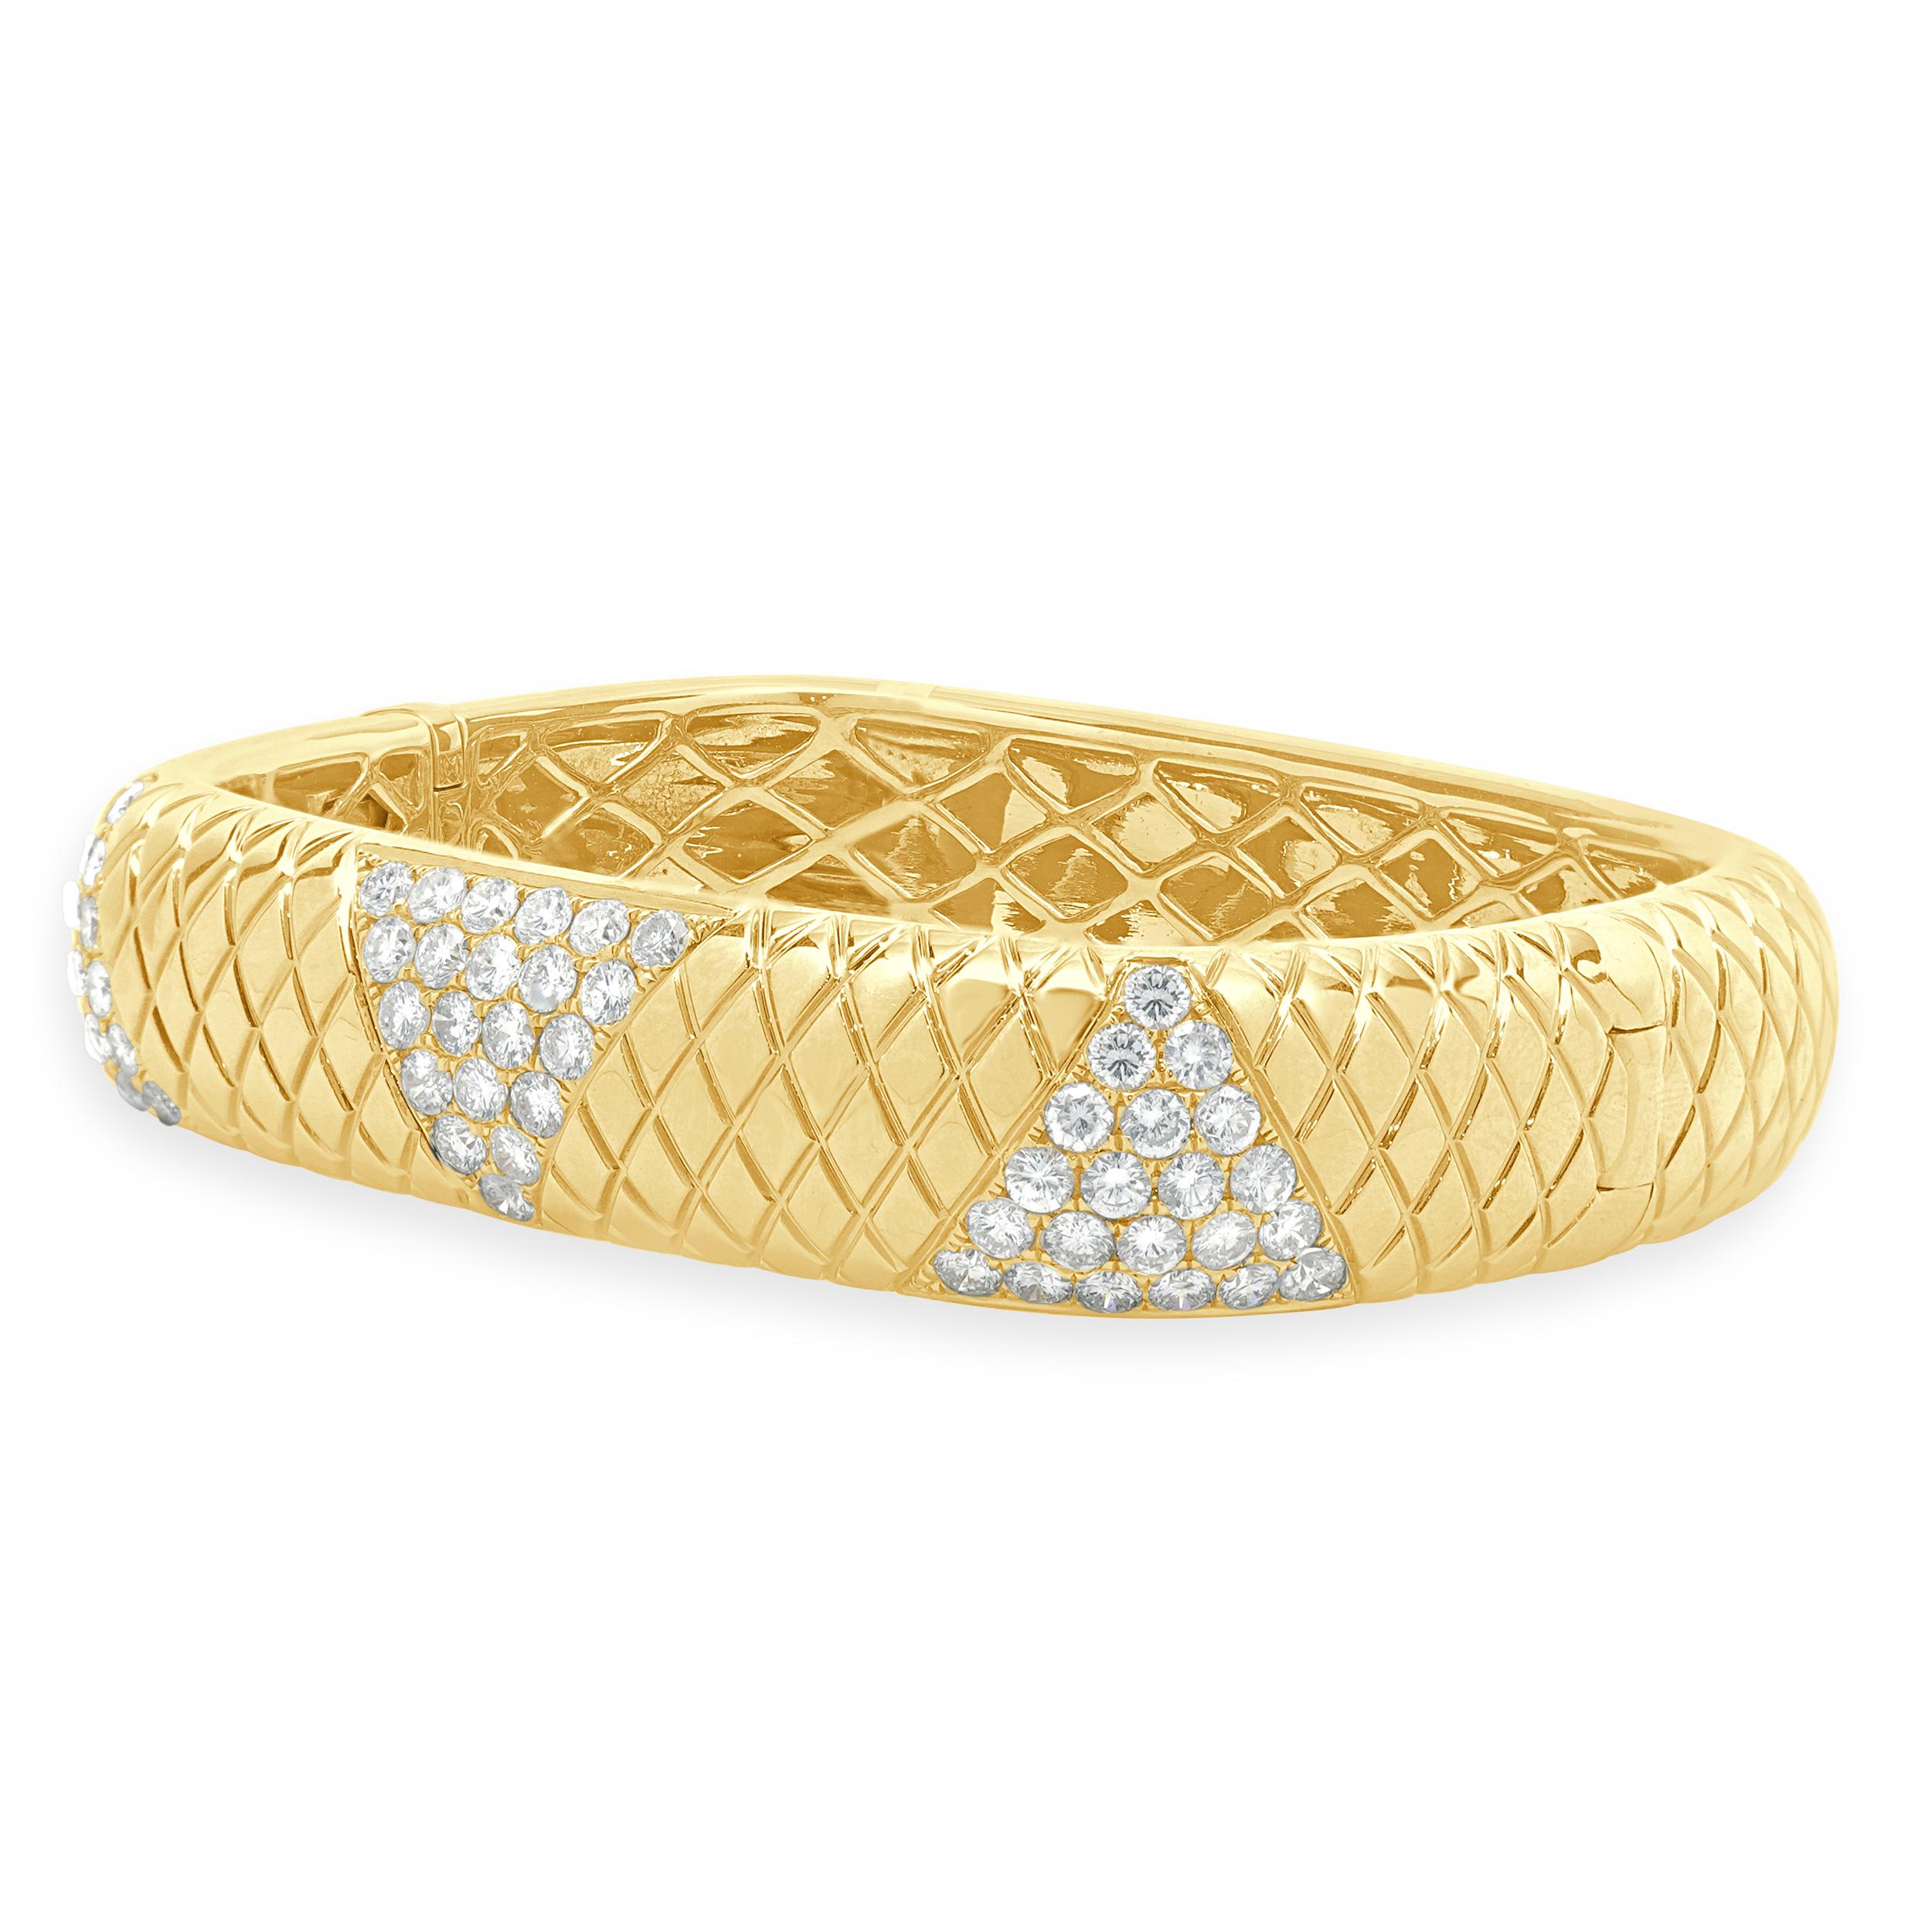 Designer: custom design
Material: 14K yellow gold
Diamond: 63 round brilliant cut = 4.25cttw
Color: G
Clarity: VS1-2
Dimensions: bracelet will fit up to a 7-inch wrist
Weight: 50.27 grams